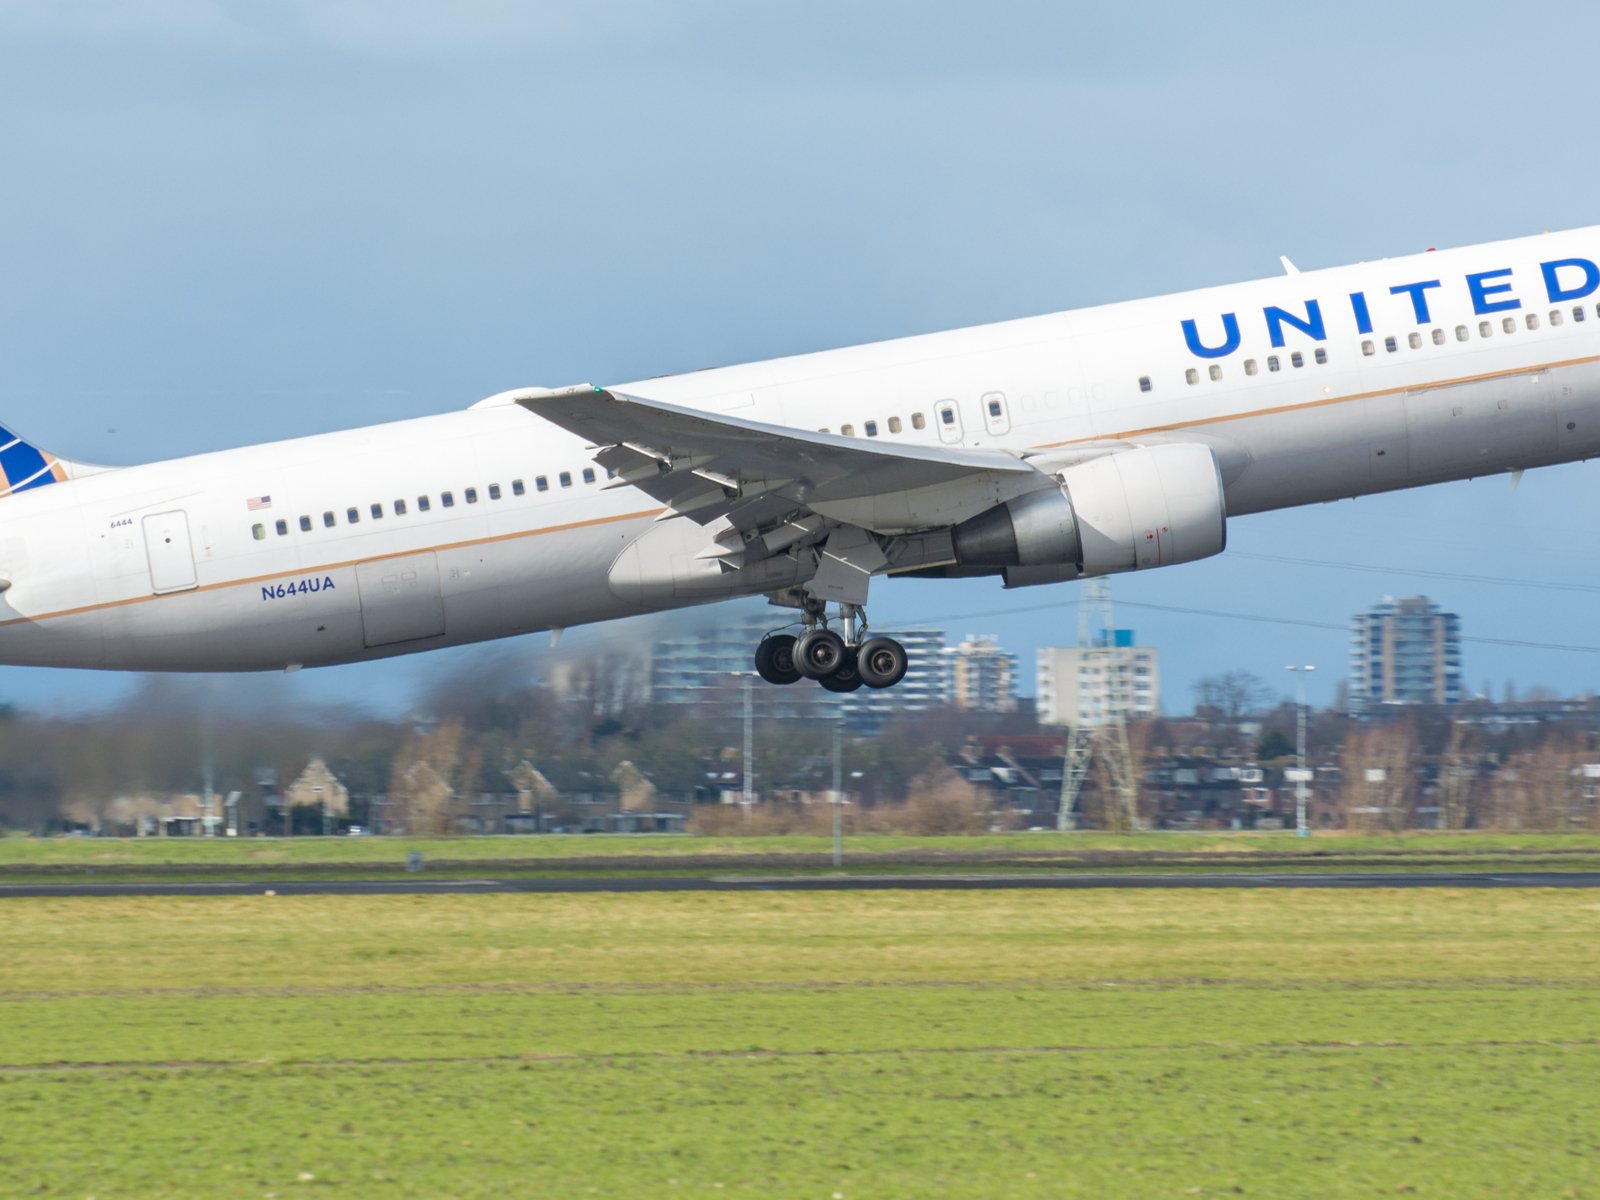 United Airlines is taking off to more destinations next year in a post-pandemic travel recovery.